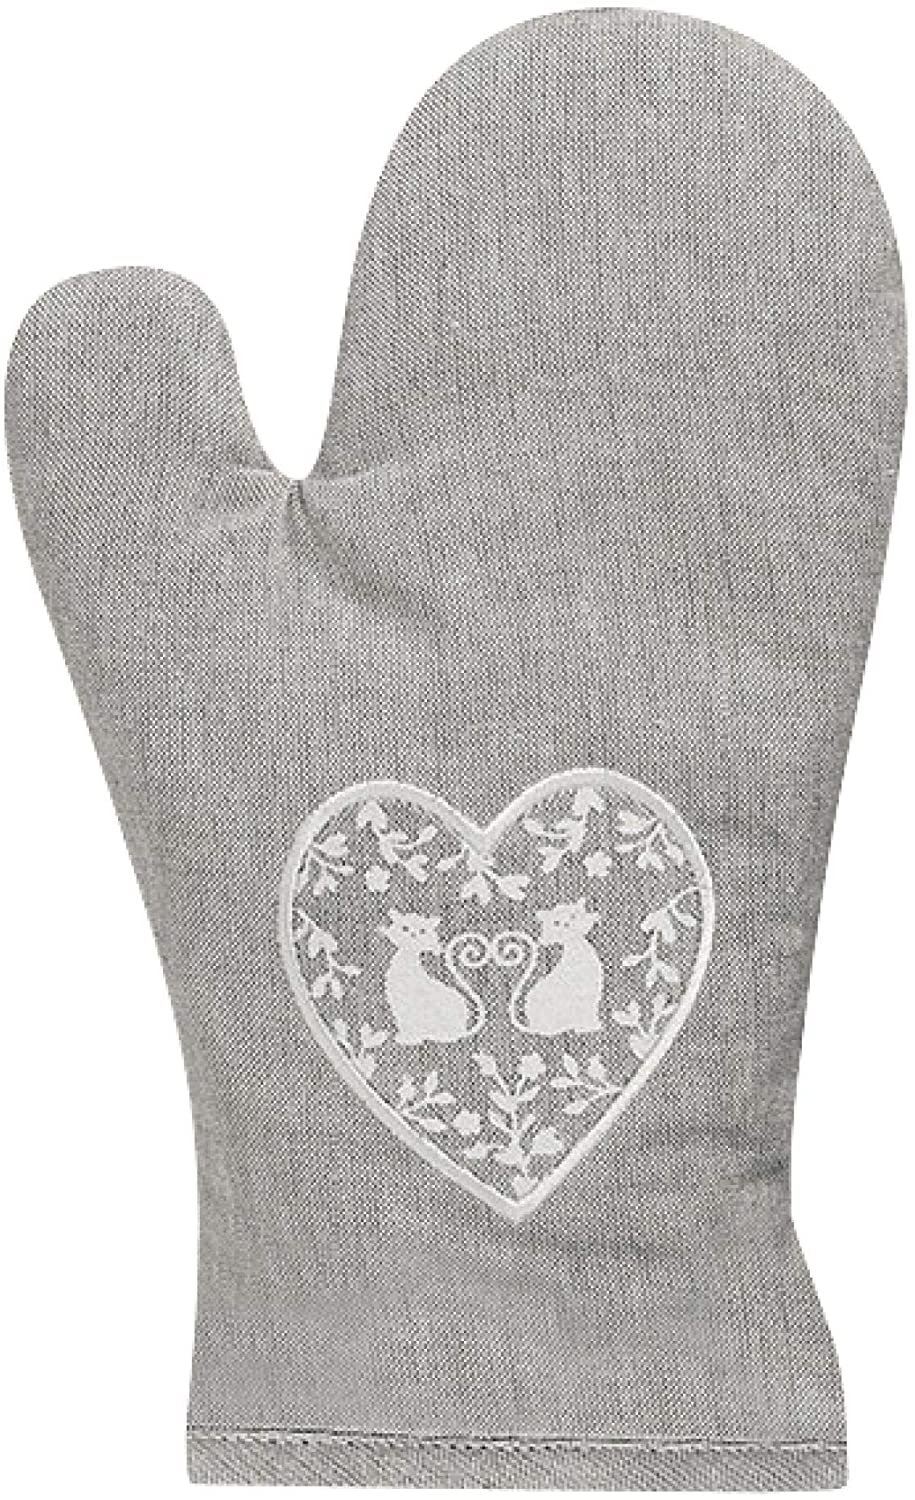 Duo of White Cats in a Heart Grey Oven Glove / Gauntlet